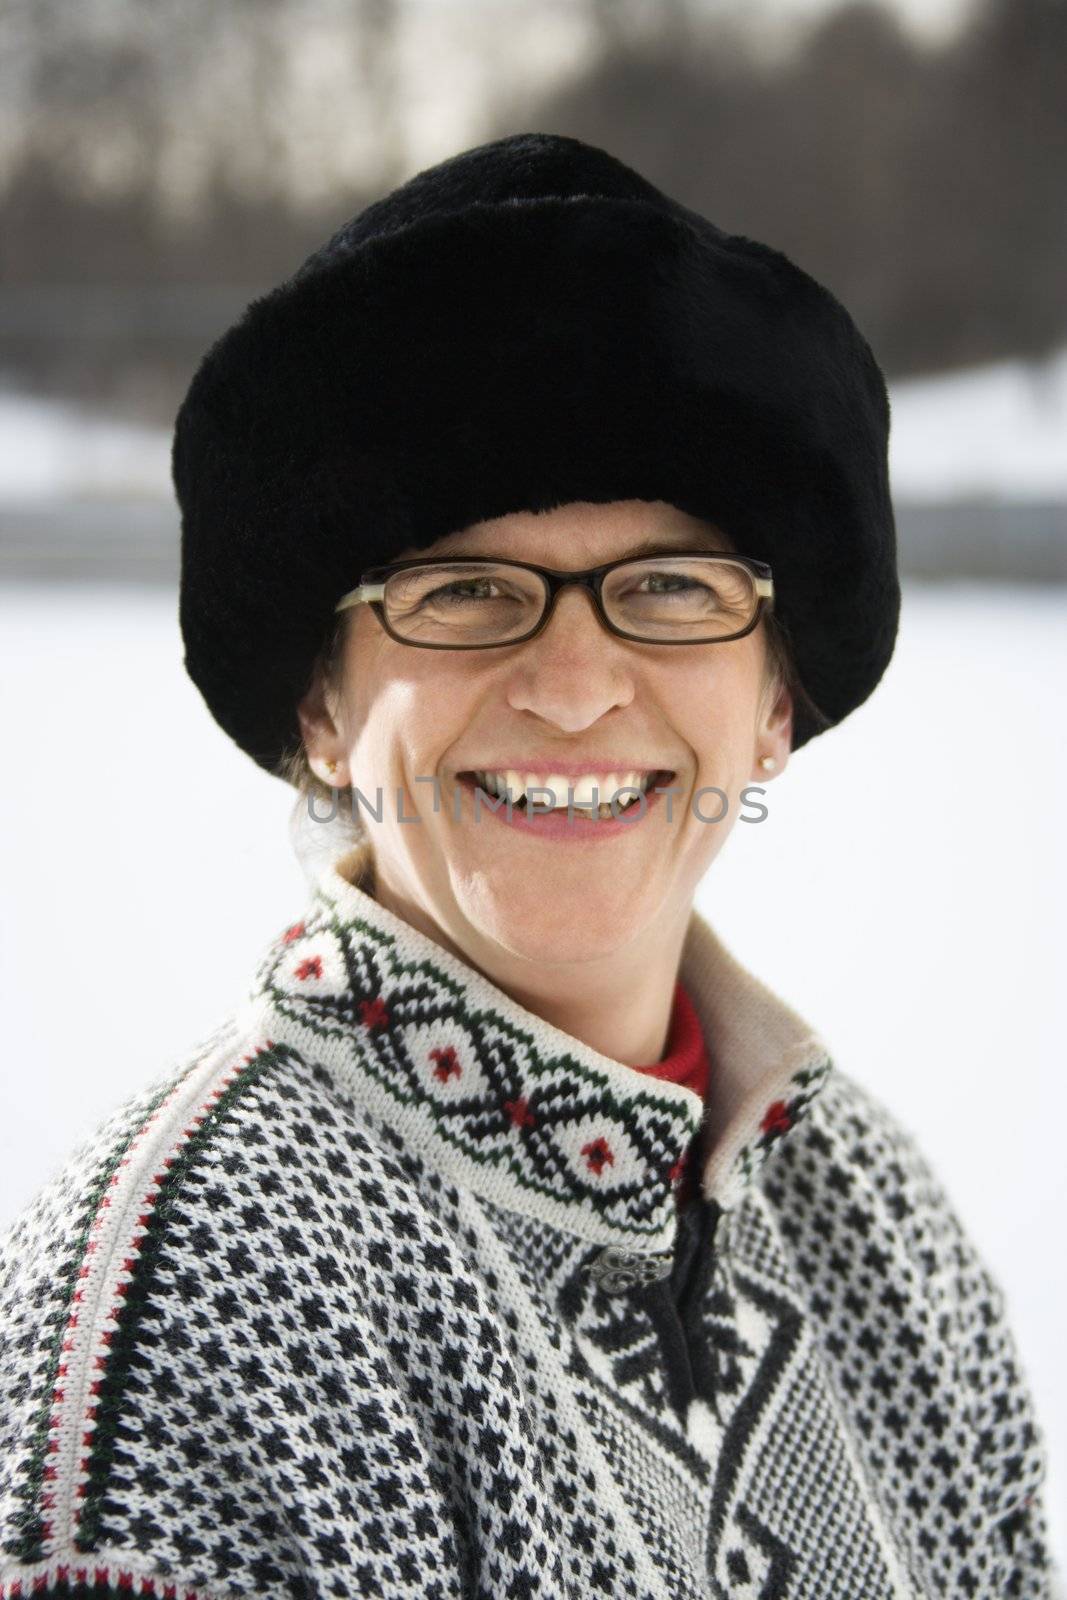 Portrait of Caucasian middle aged woman wearing sweater and black winter hat smiling at viewer.